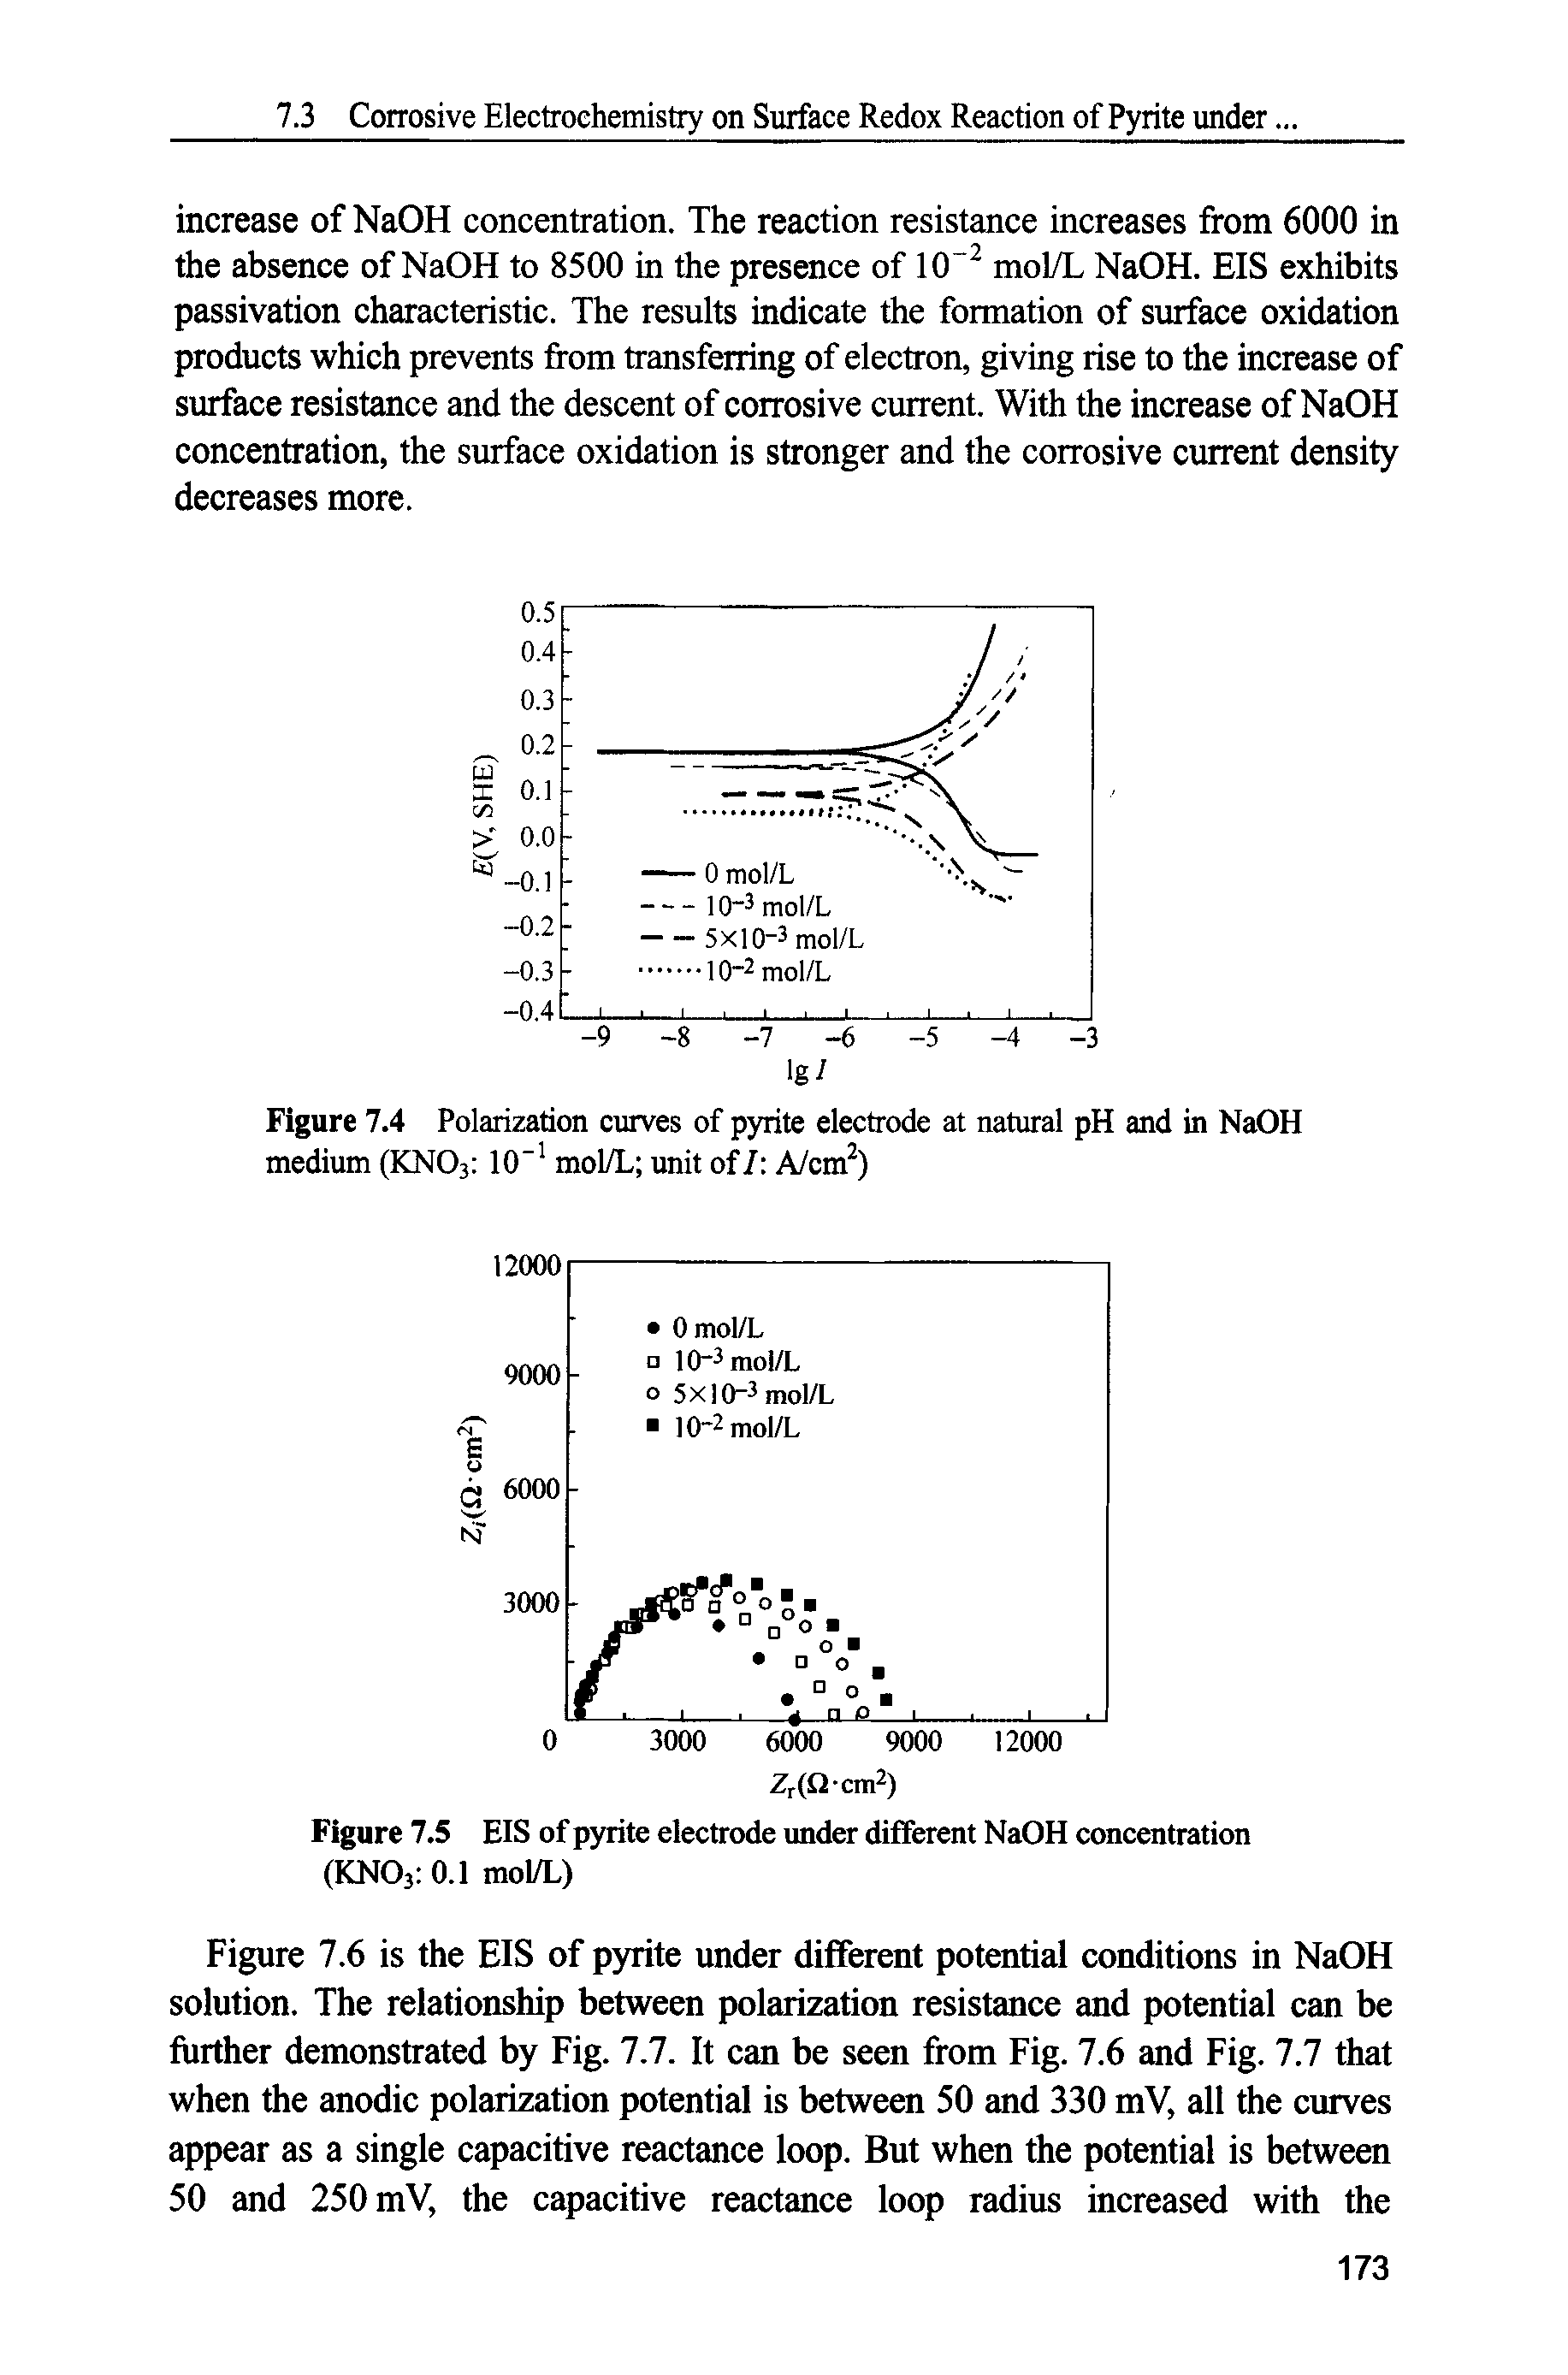 Figure 7.6 is the EIS of pyrite under different potential conditions in NaOH solution. The relationship between polarization resistance and potential can be further demonstrated by Fig. 7.7. It can be seen from Fig. 7.6 and Fig. 7.7 that when the anodic polarization potential is between 50 and 330 mV, all the curves appear as a single capacitive reactance loop. But when the potential is between 50 and 250 mV, the capacitive reactance loop radius increased with the...